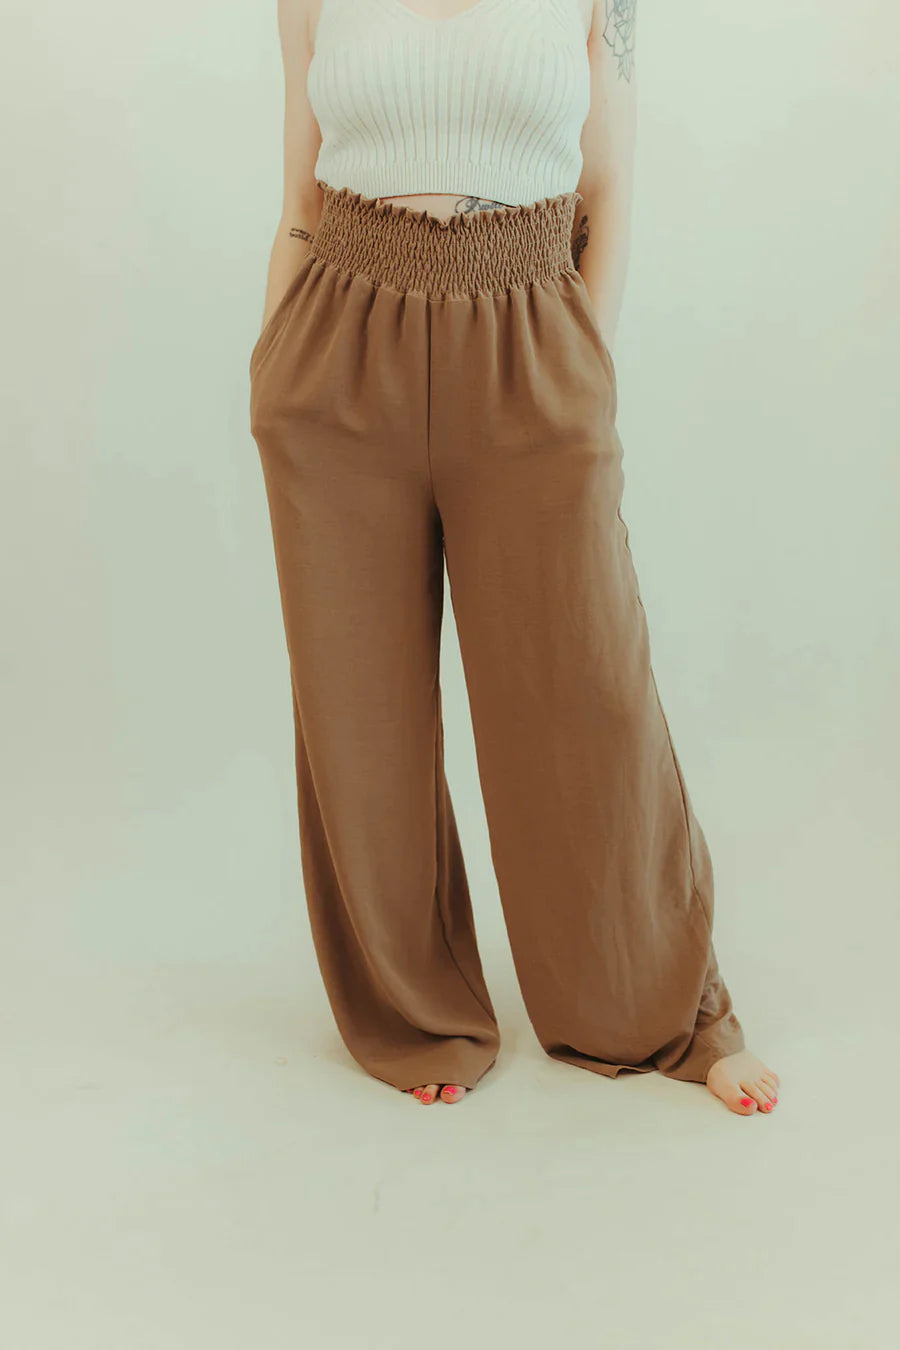 Coco Smocked Light Weight Wide Leg Pants